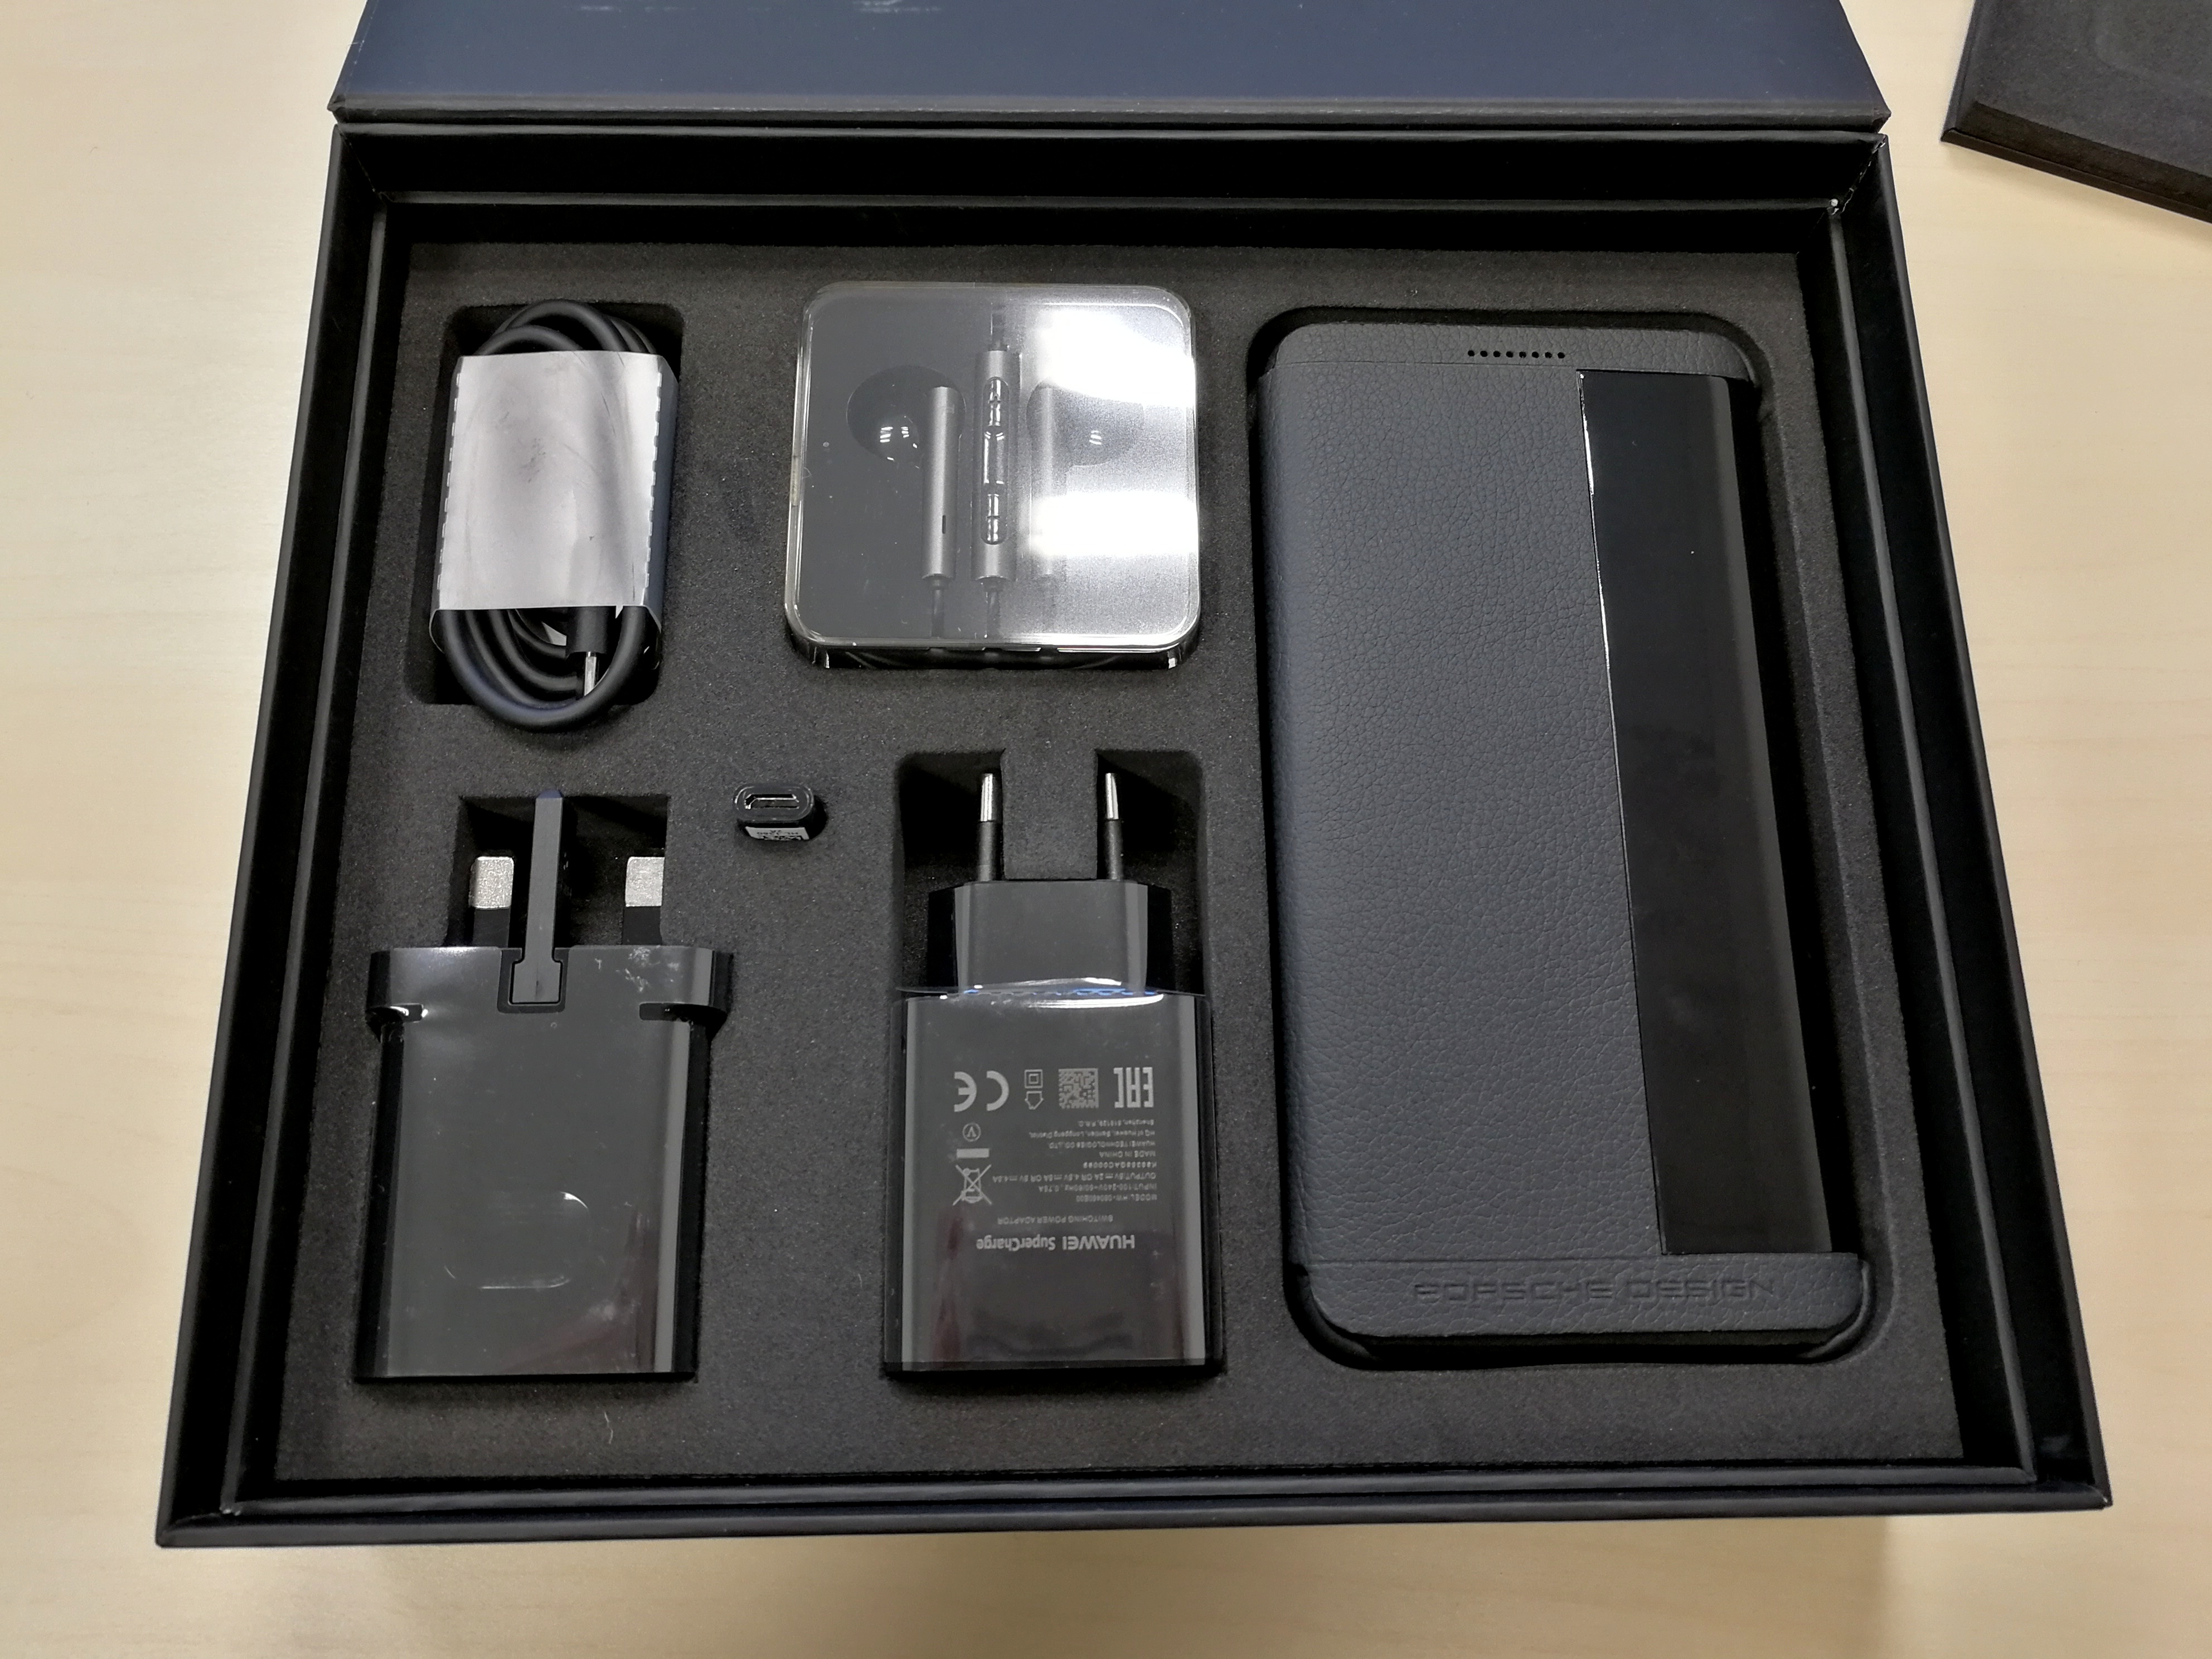 mengsel Elementair Nauwkeurig Huawei Mate 9 Porsche Design Unboxing and Hands On Benchmarks